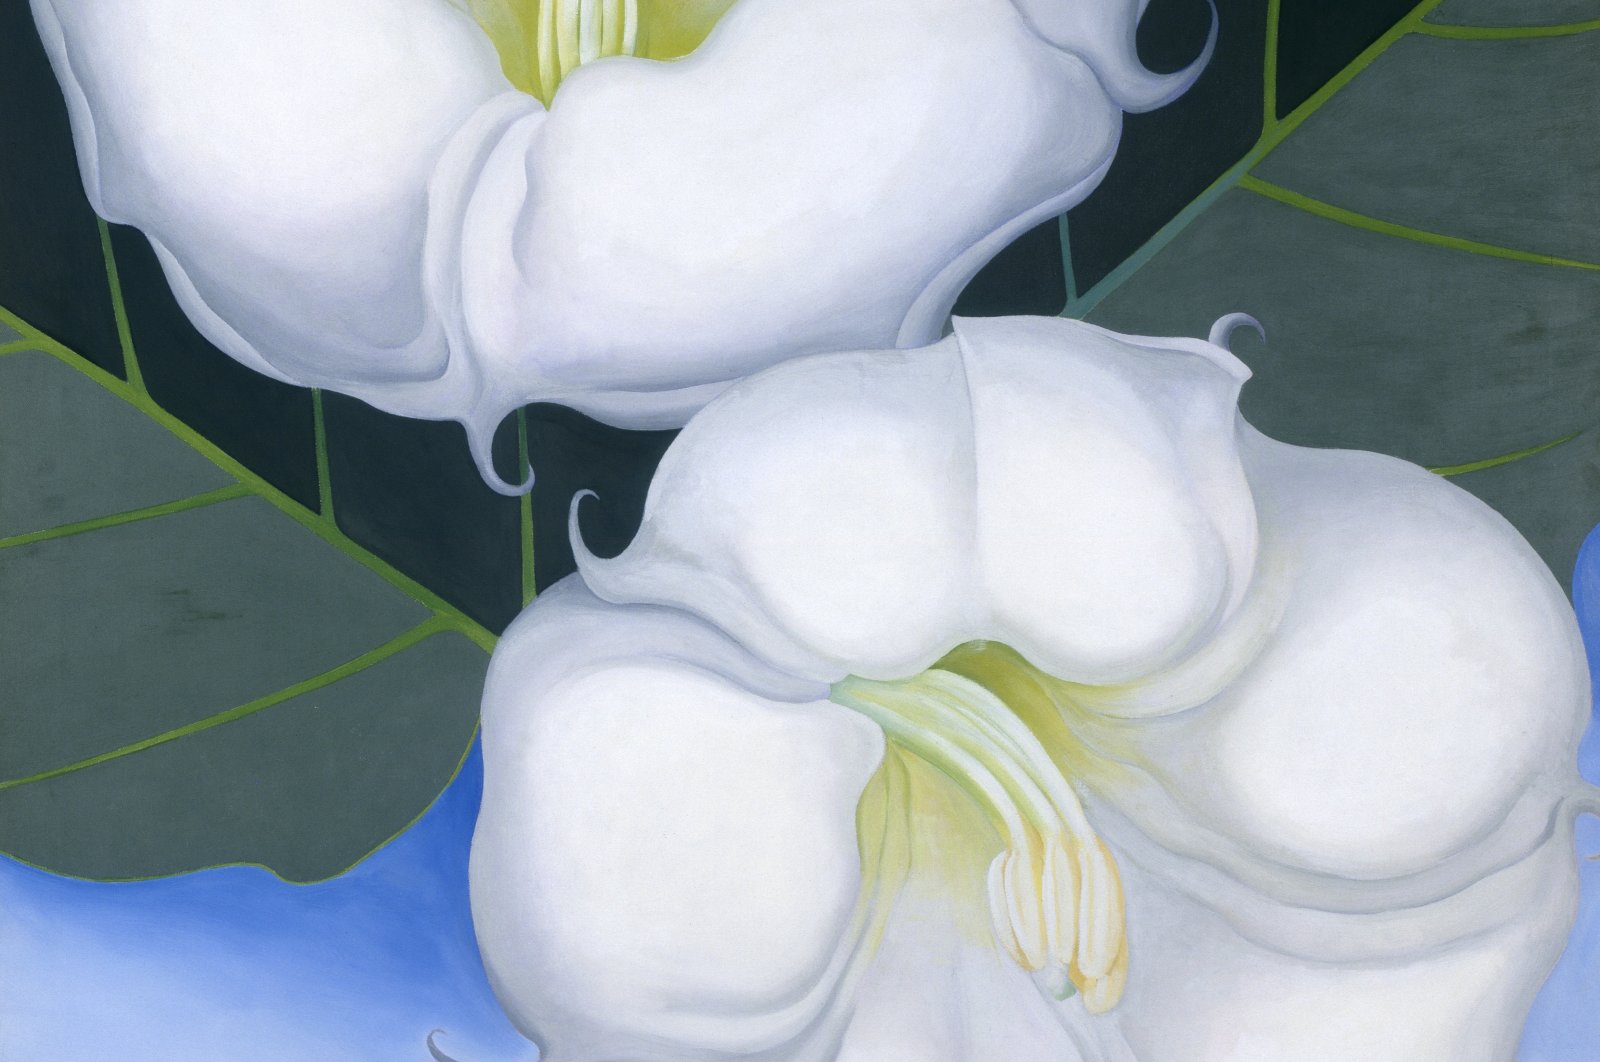 Some of the famous flower paintings are among works by Georgia O'Keefe (1887-1986) on display at the Centre Georges Pompidou in Paris, France. (DPA Photo)